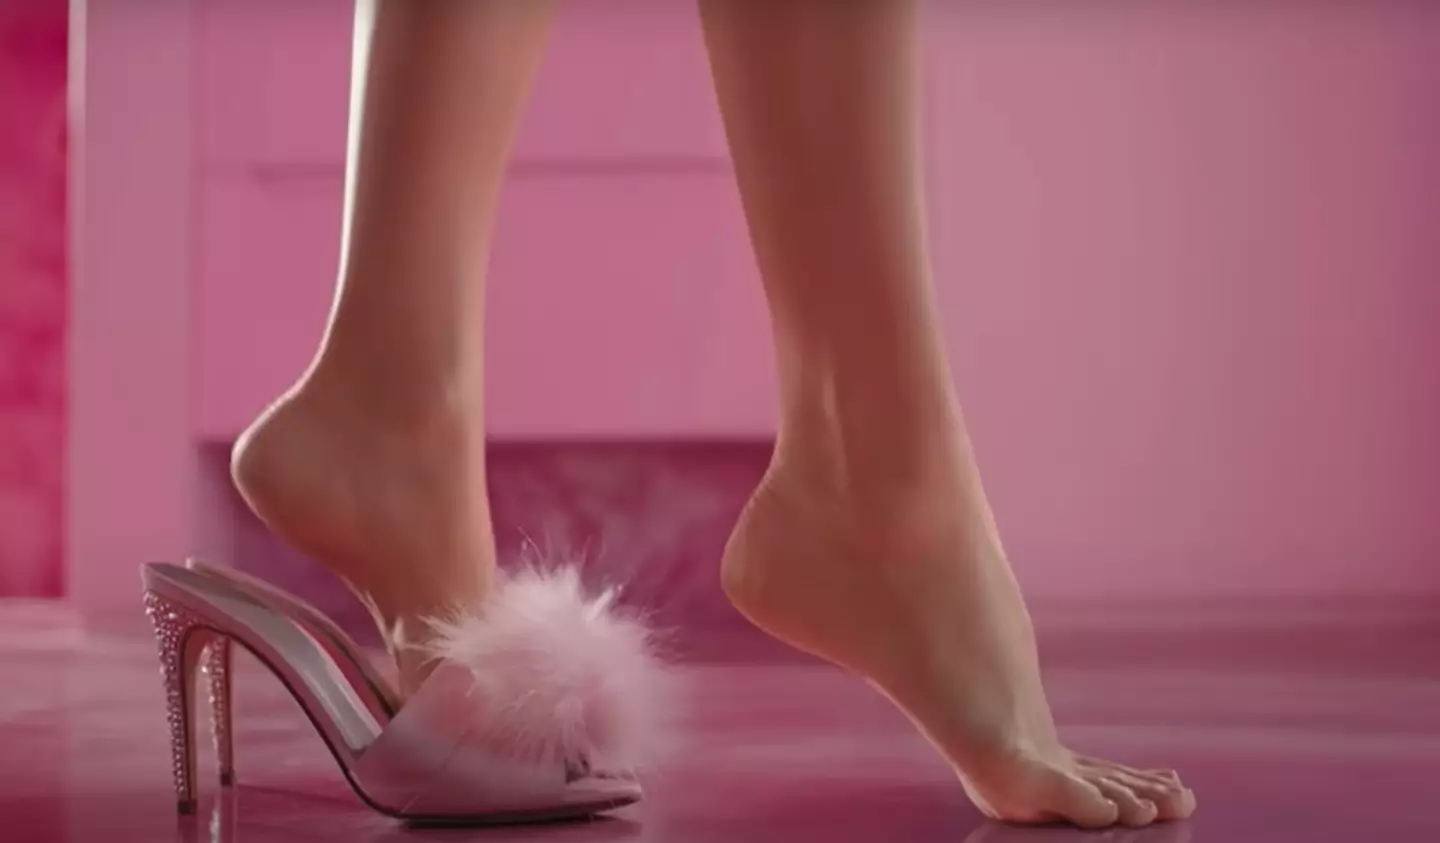 Margot Robbie's feet featured prominently in the new trailer for Barbie.